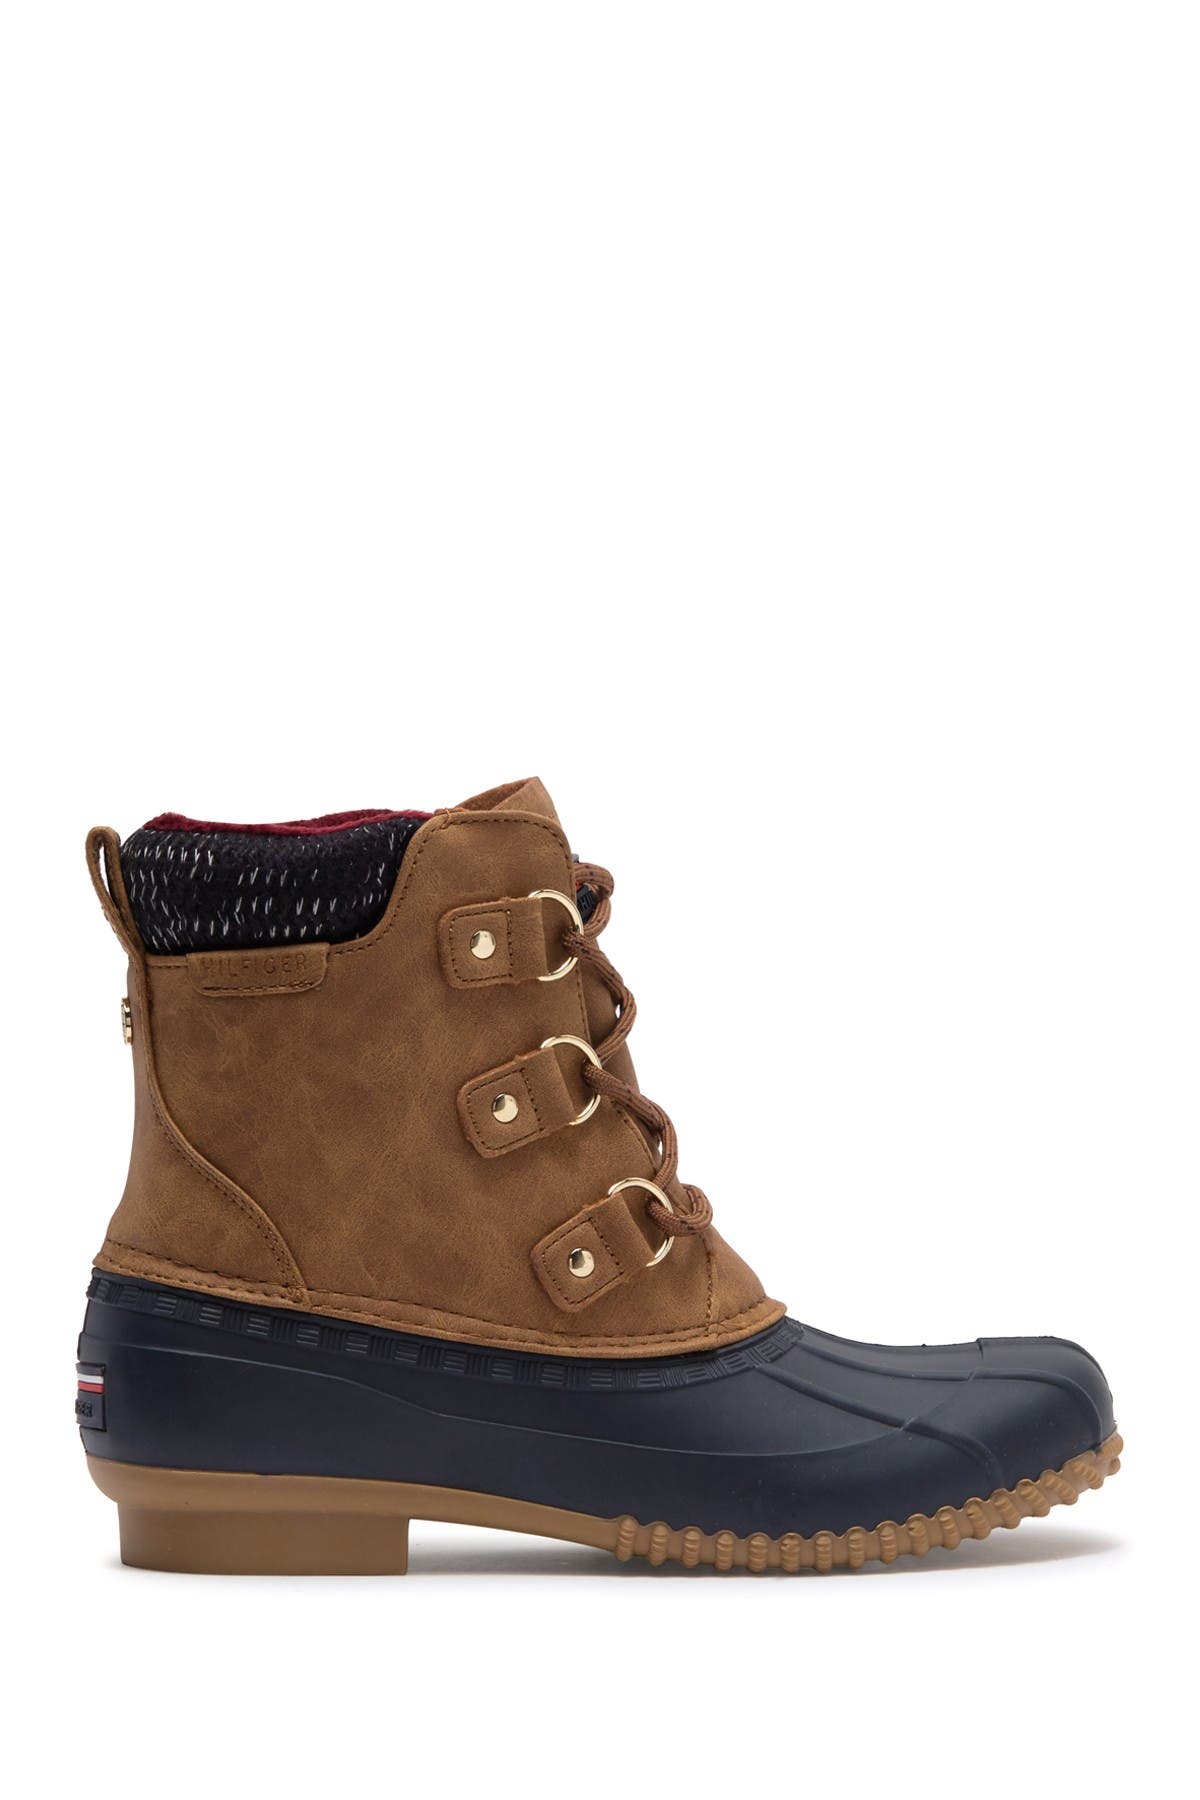 tommy hilfiger roza duck boots